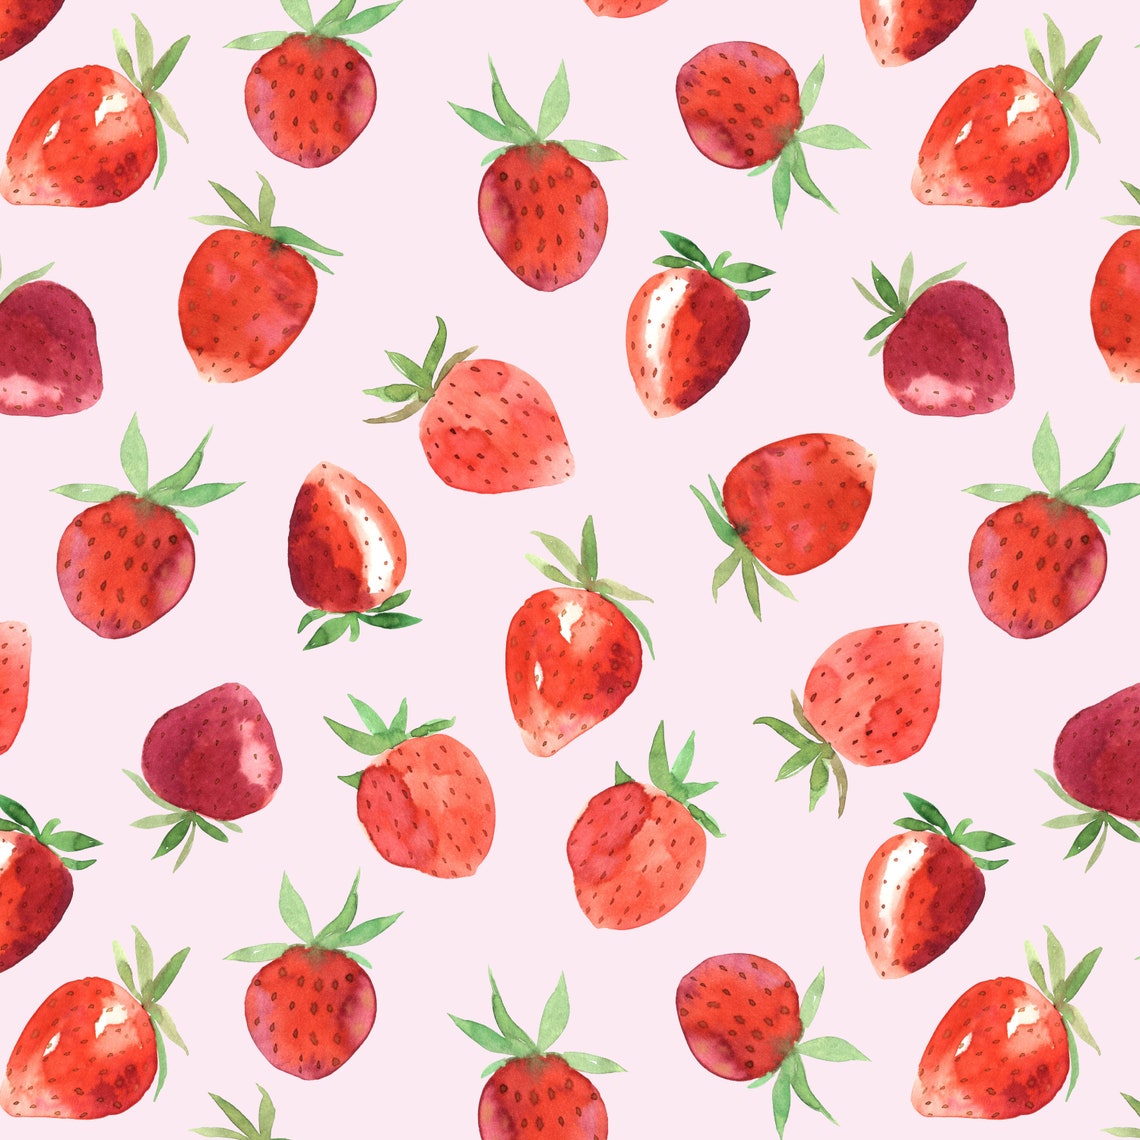 Red Strawberries Fabric by the Yard. Quilting Cotton Organic - Etsy